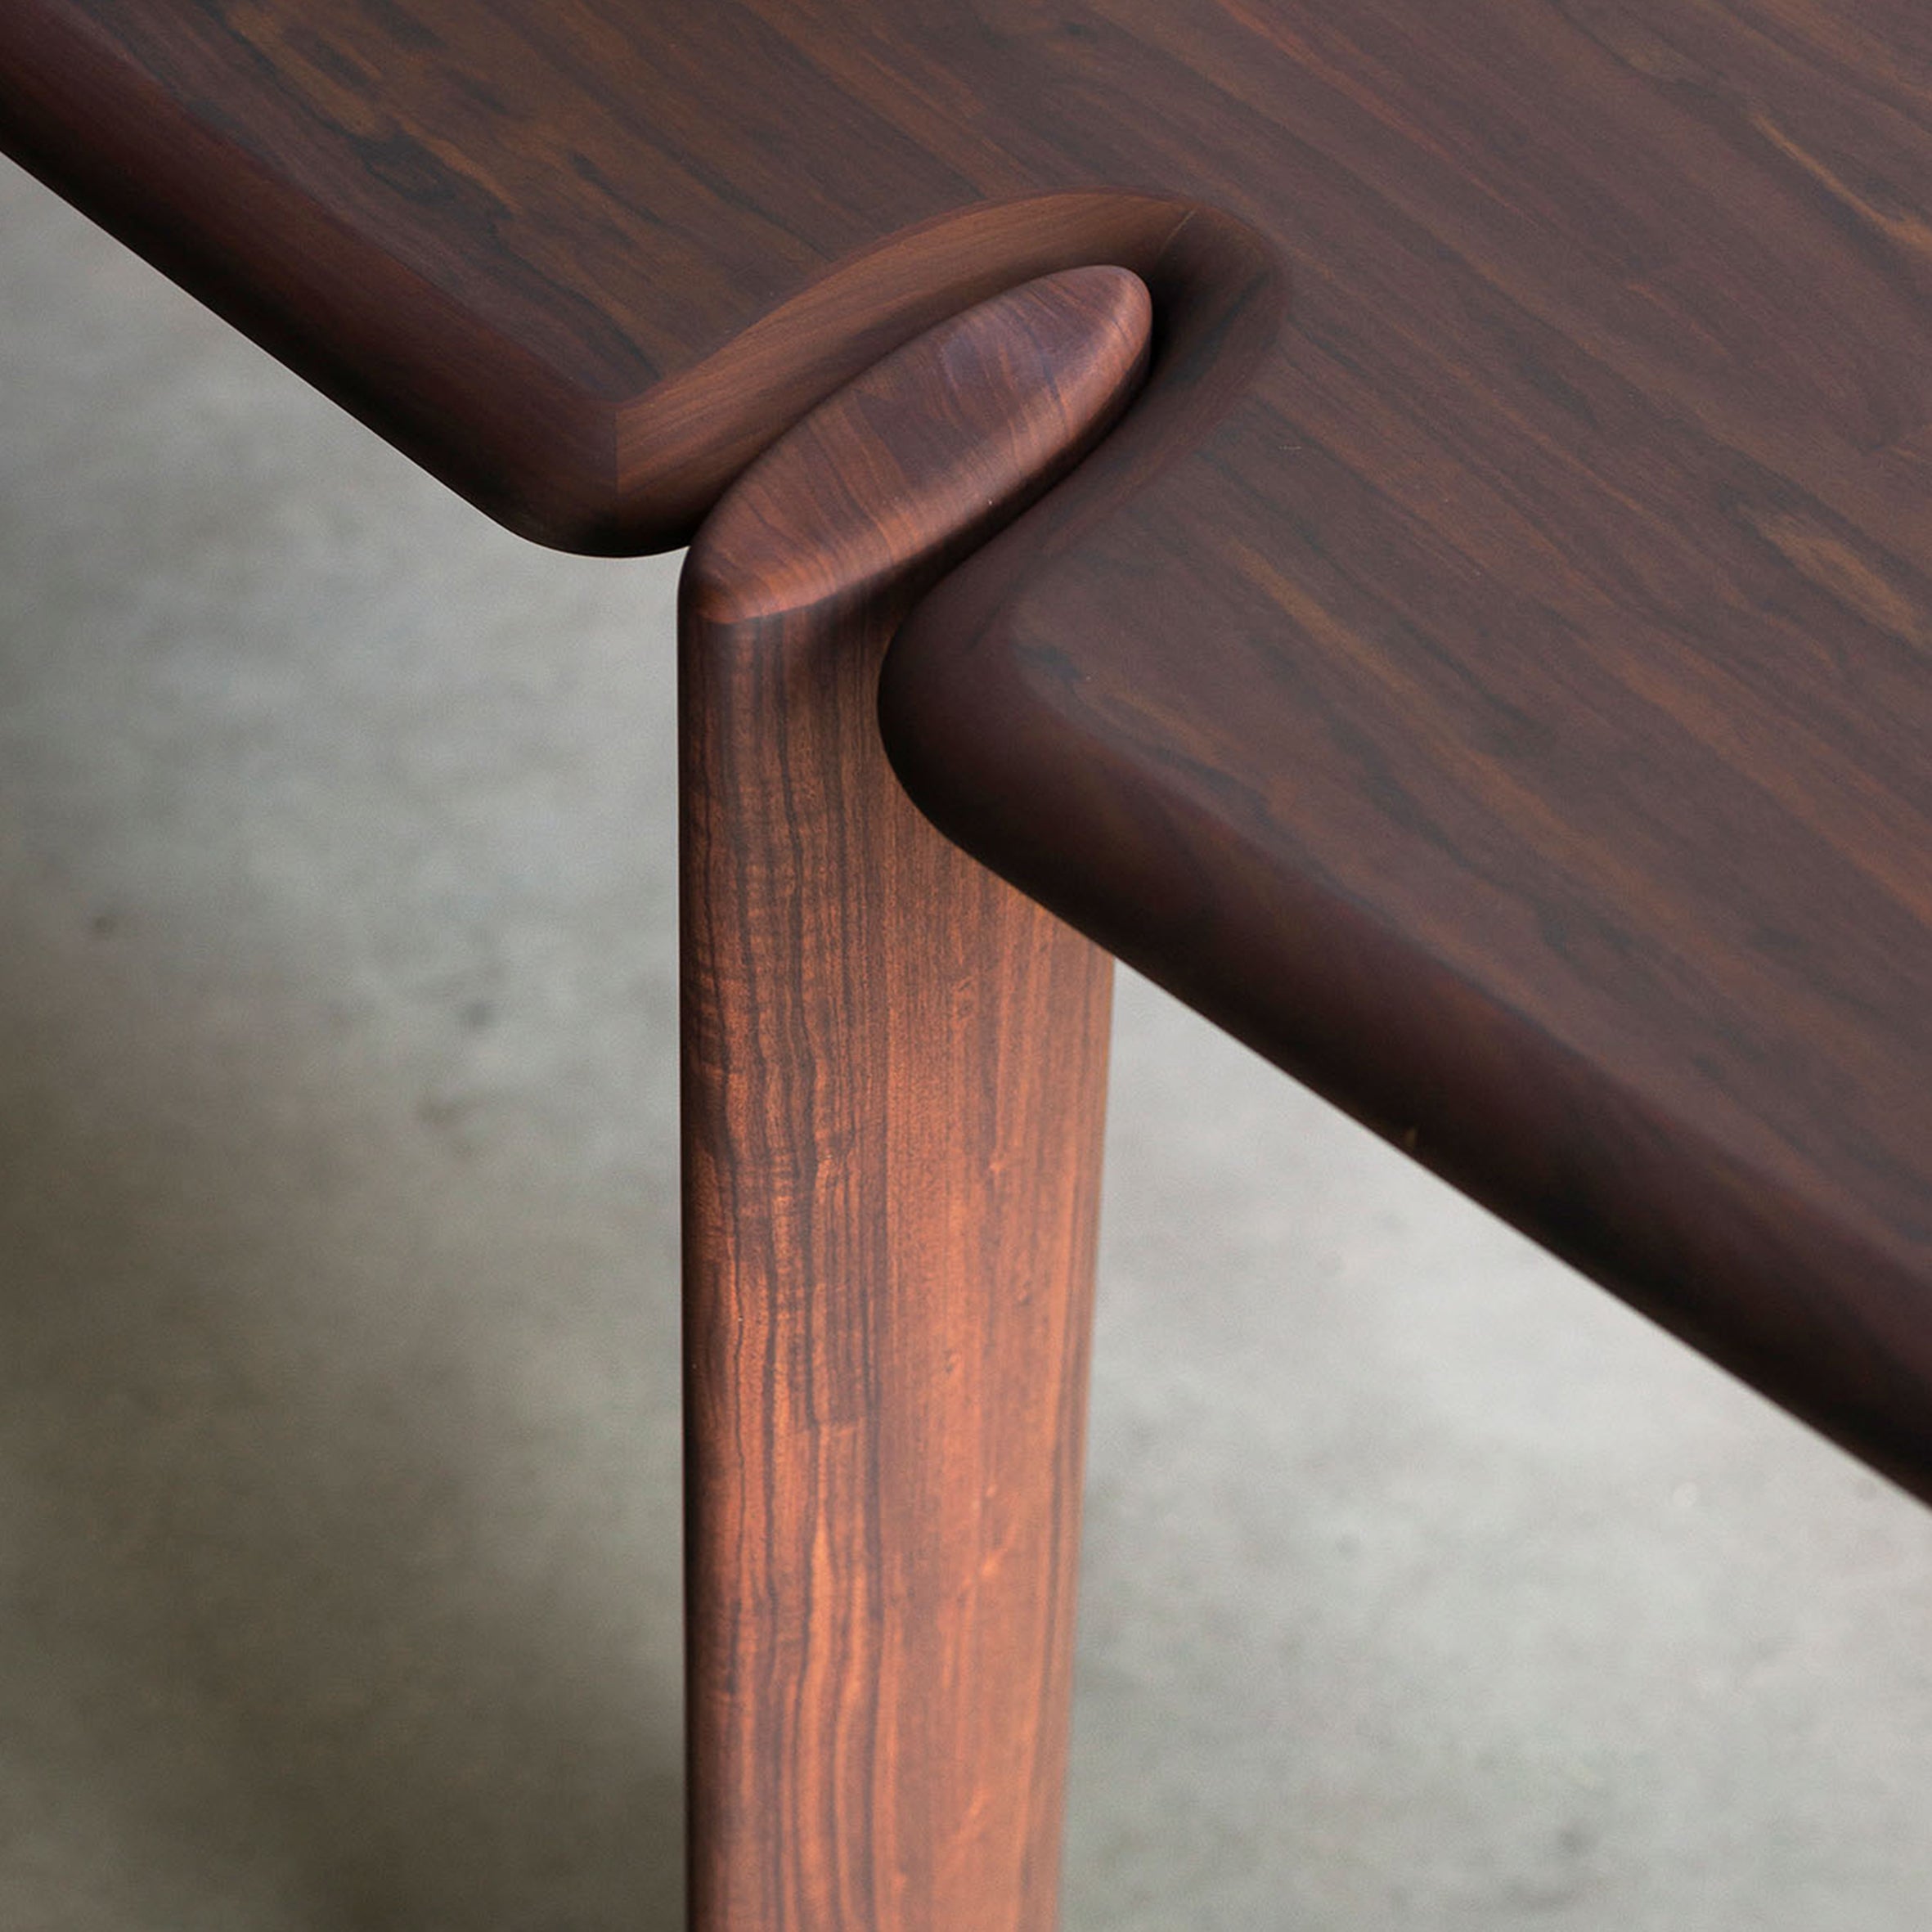 Isamu Dining Table